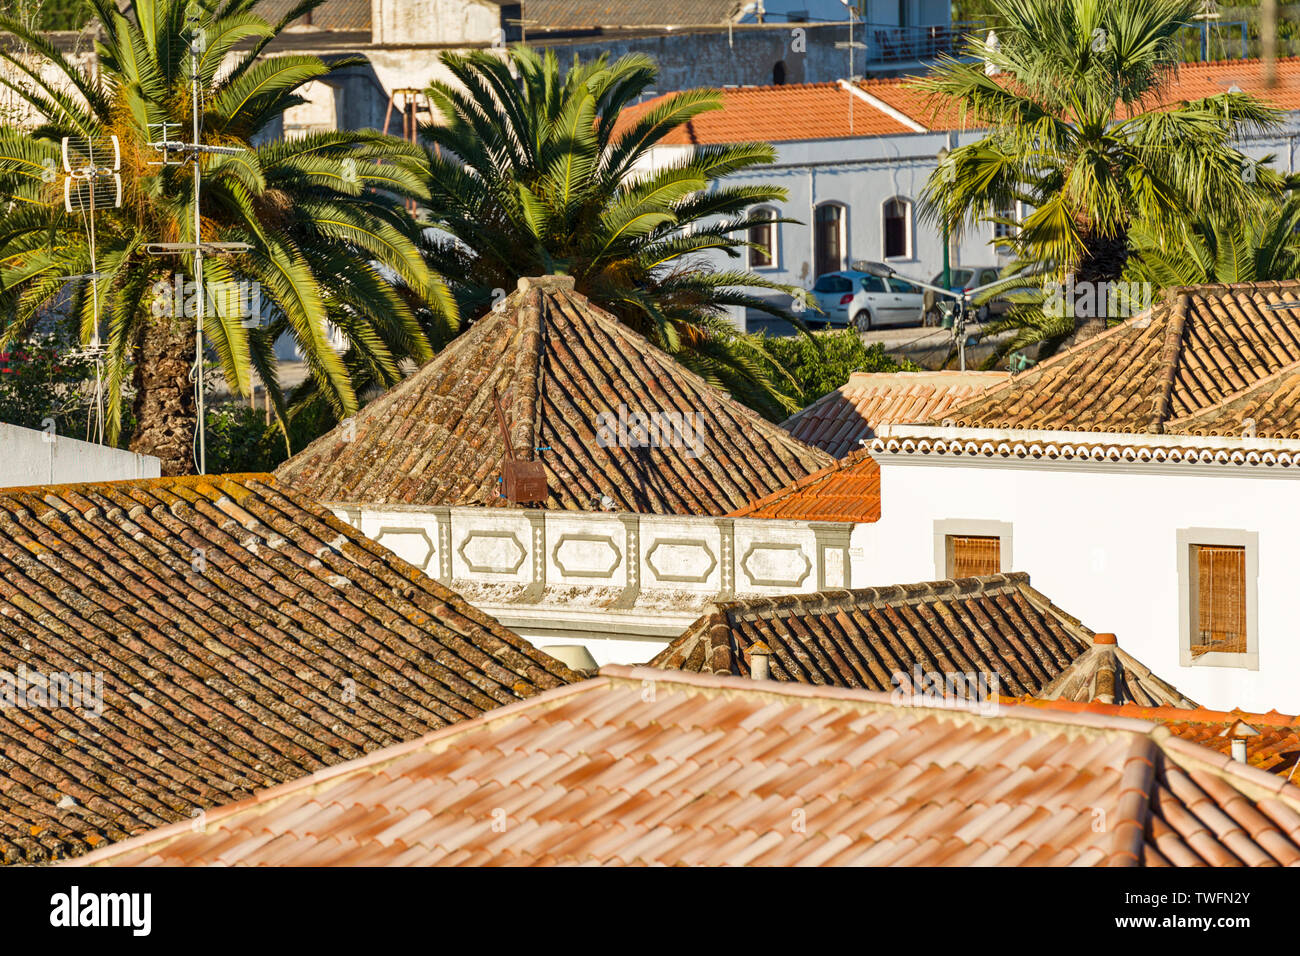 the four-sided roof bears witness to a strong oriental influence in emblematic architecture of the city of Tavira, Algarve, Portugal Stock Photo